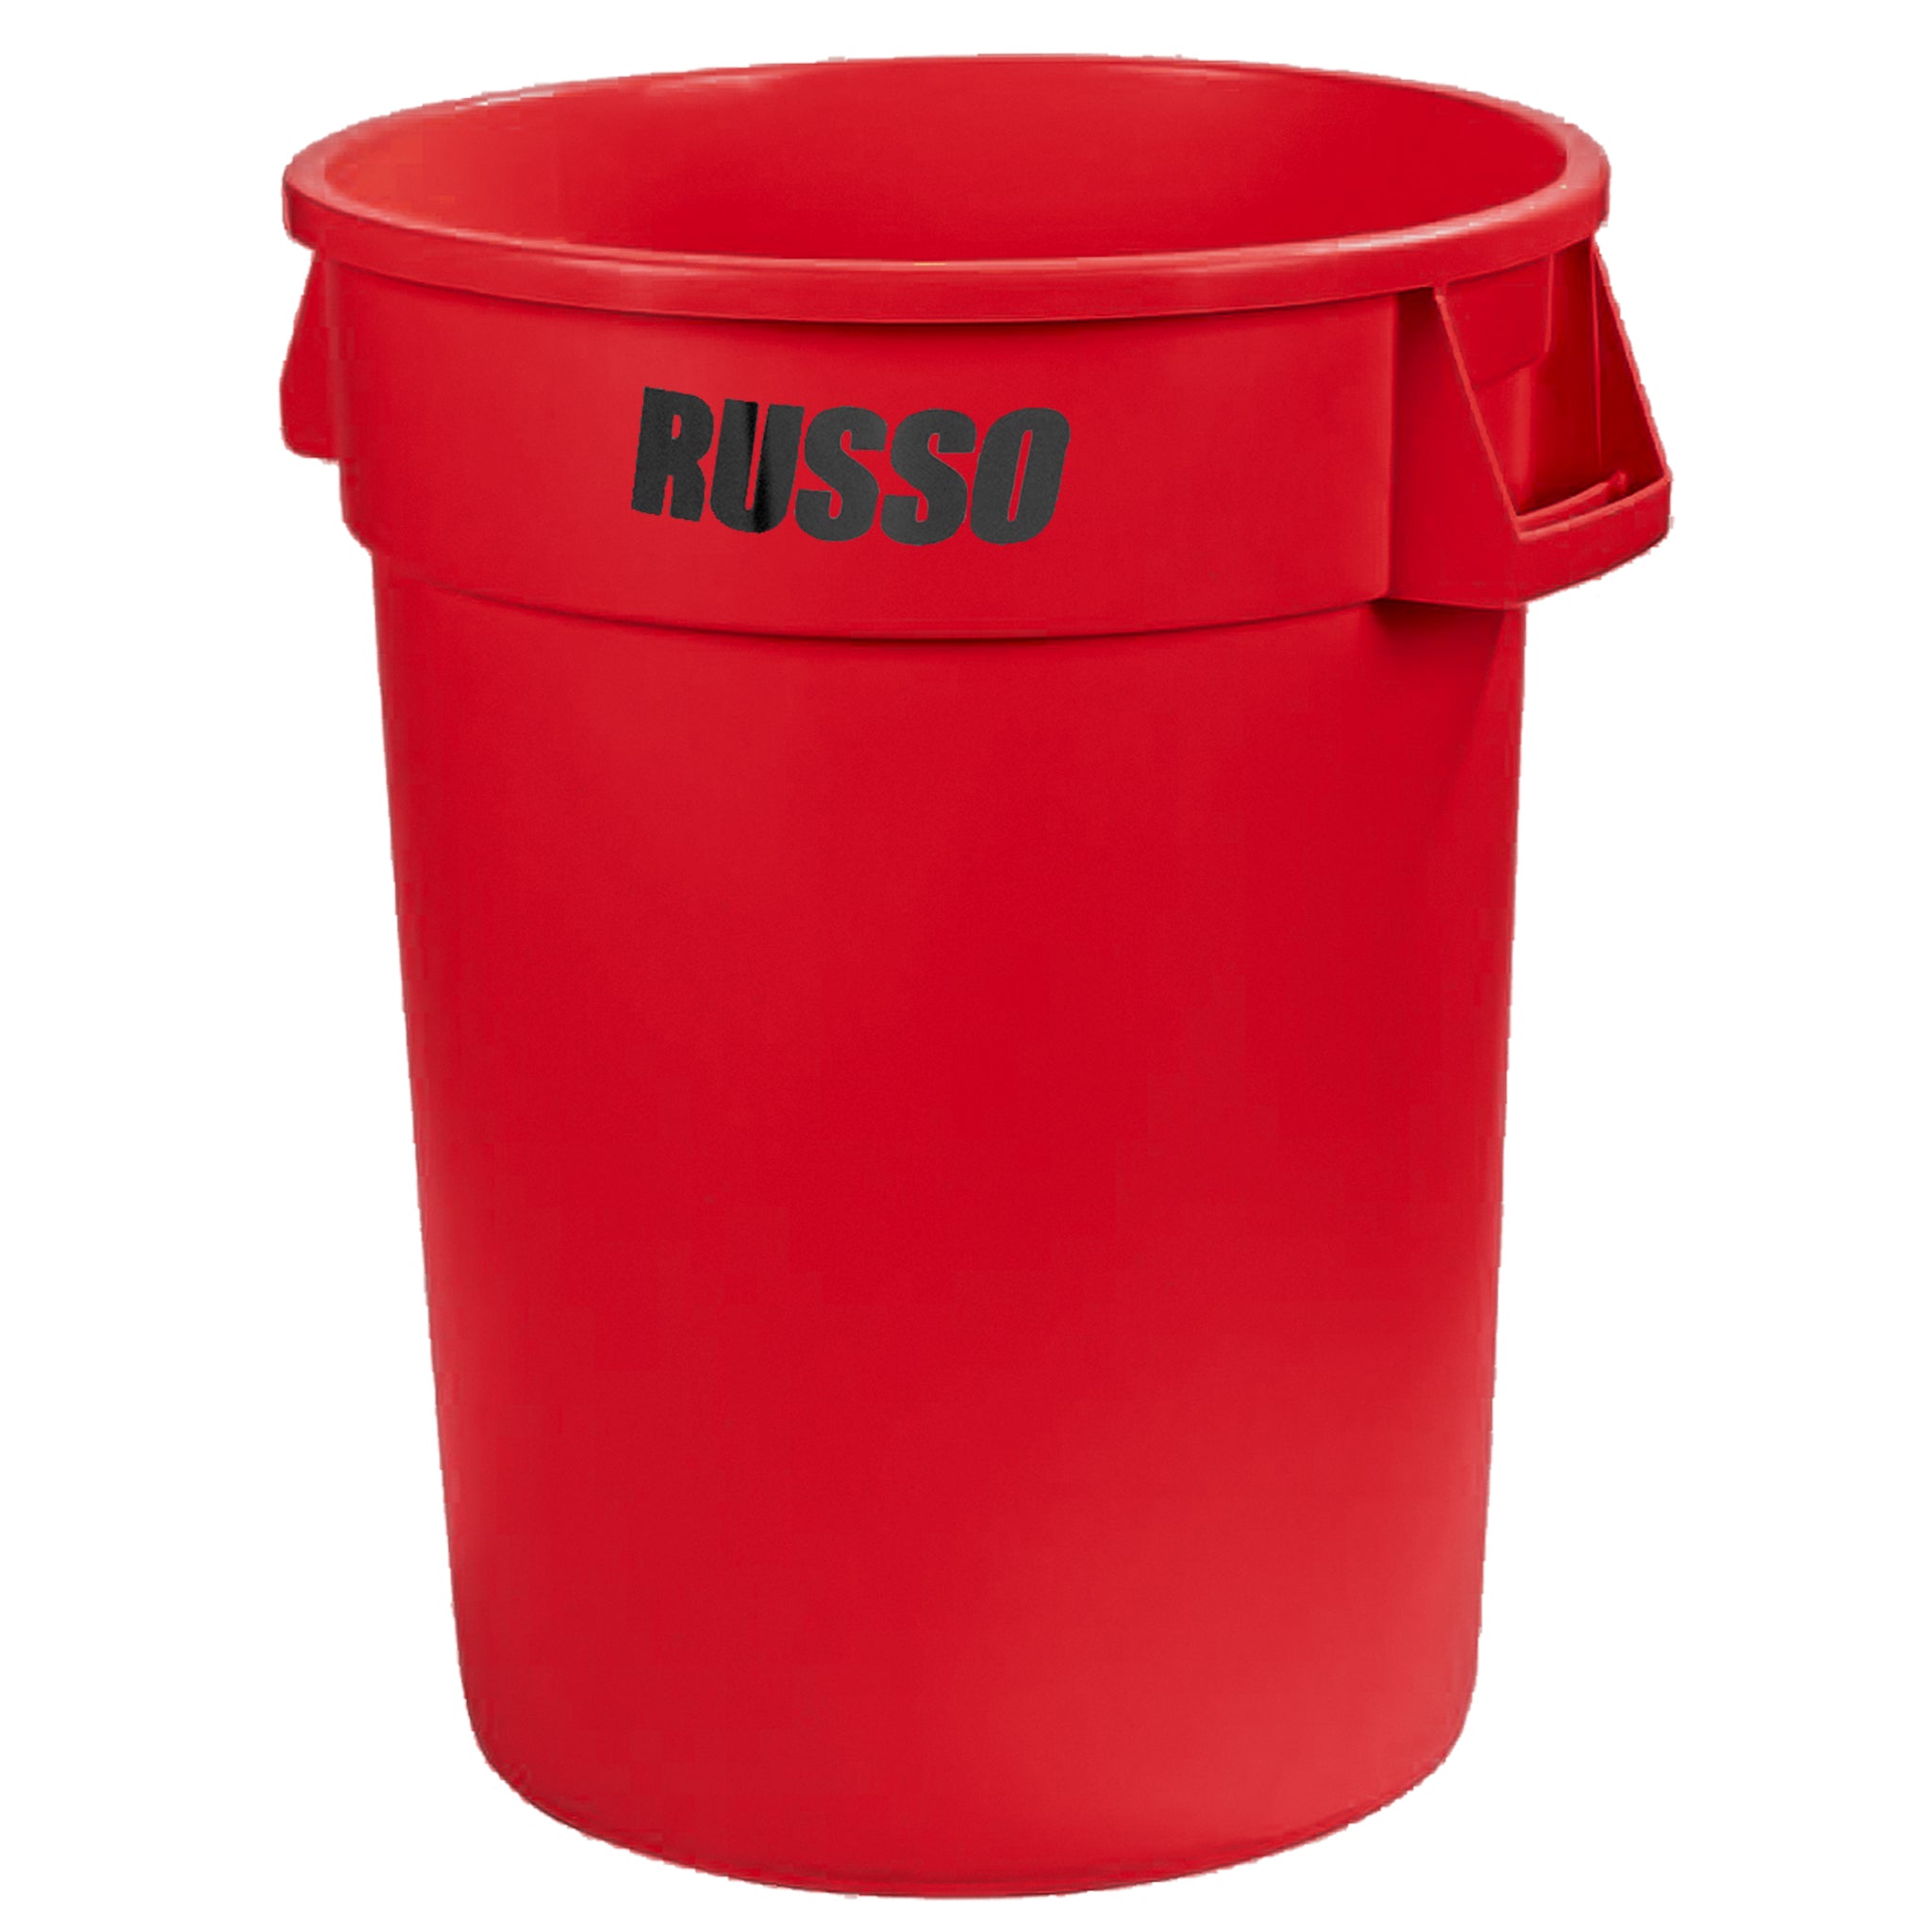 RUSSO Glow Garbage Can 44 Gallon – Red